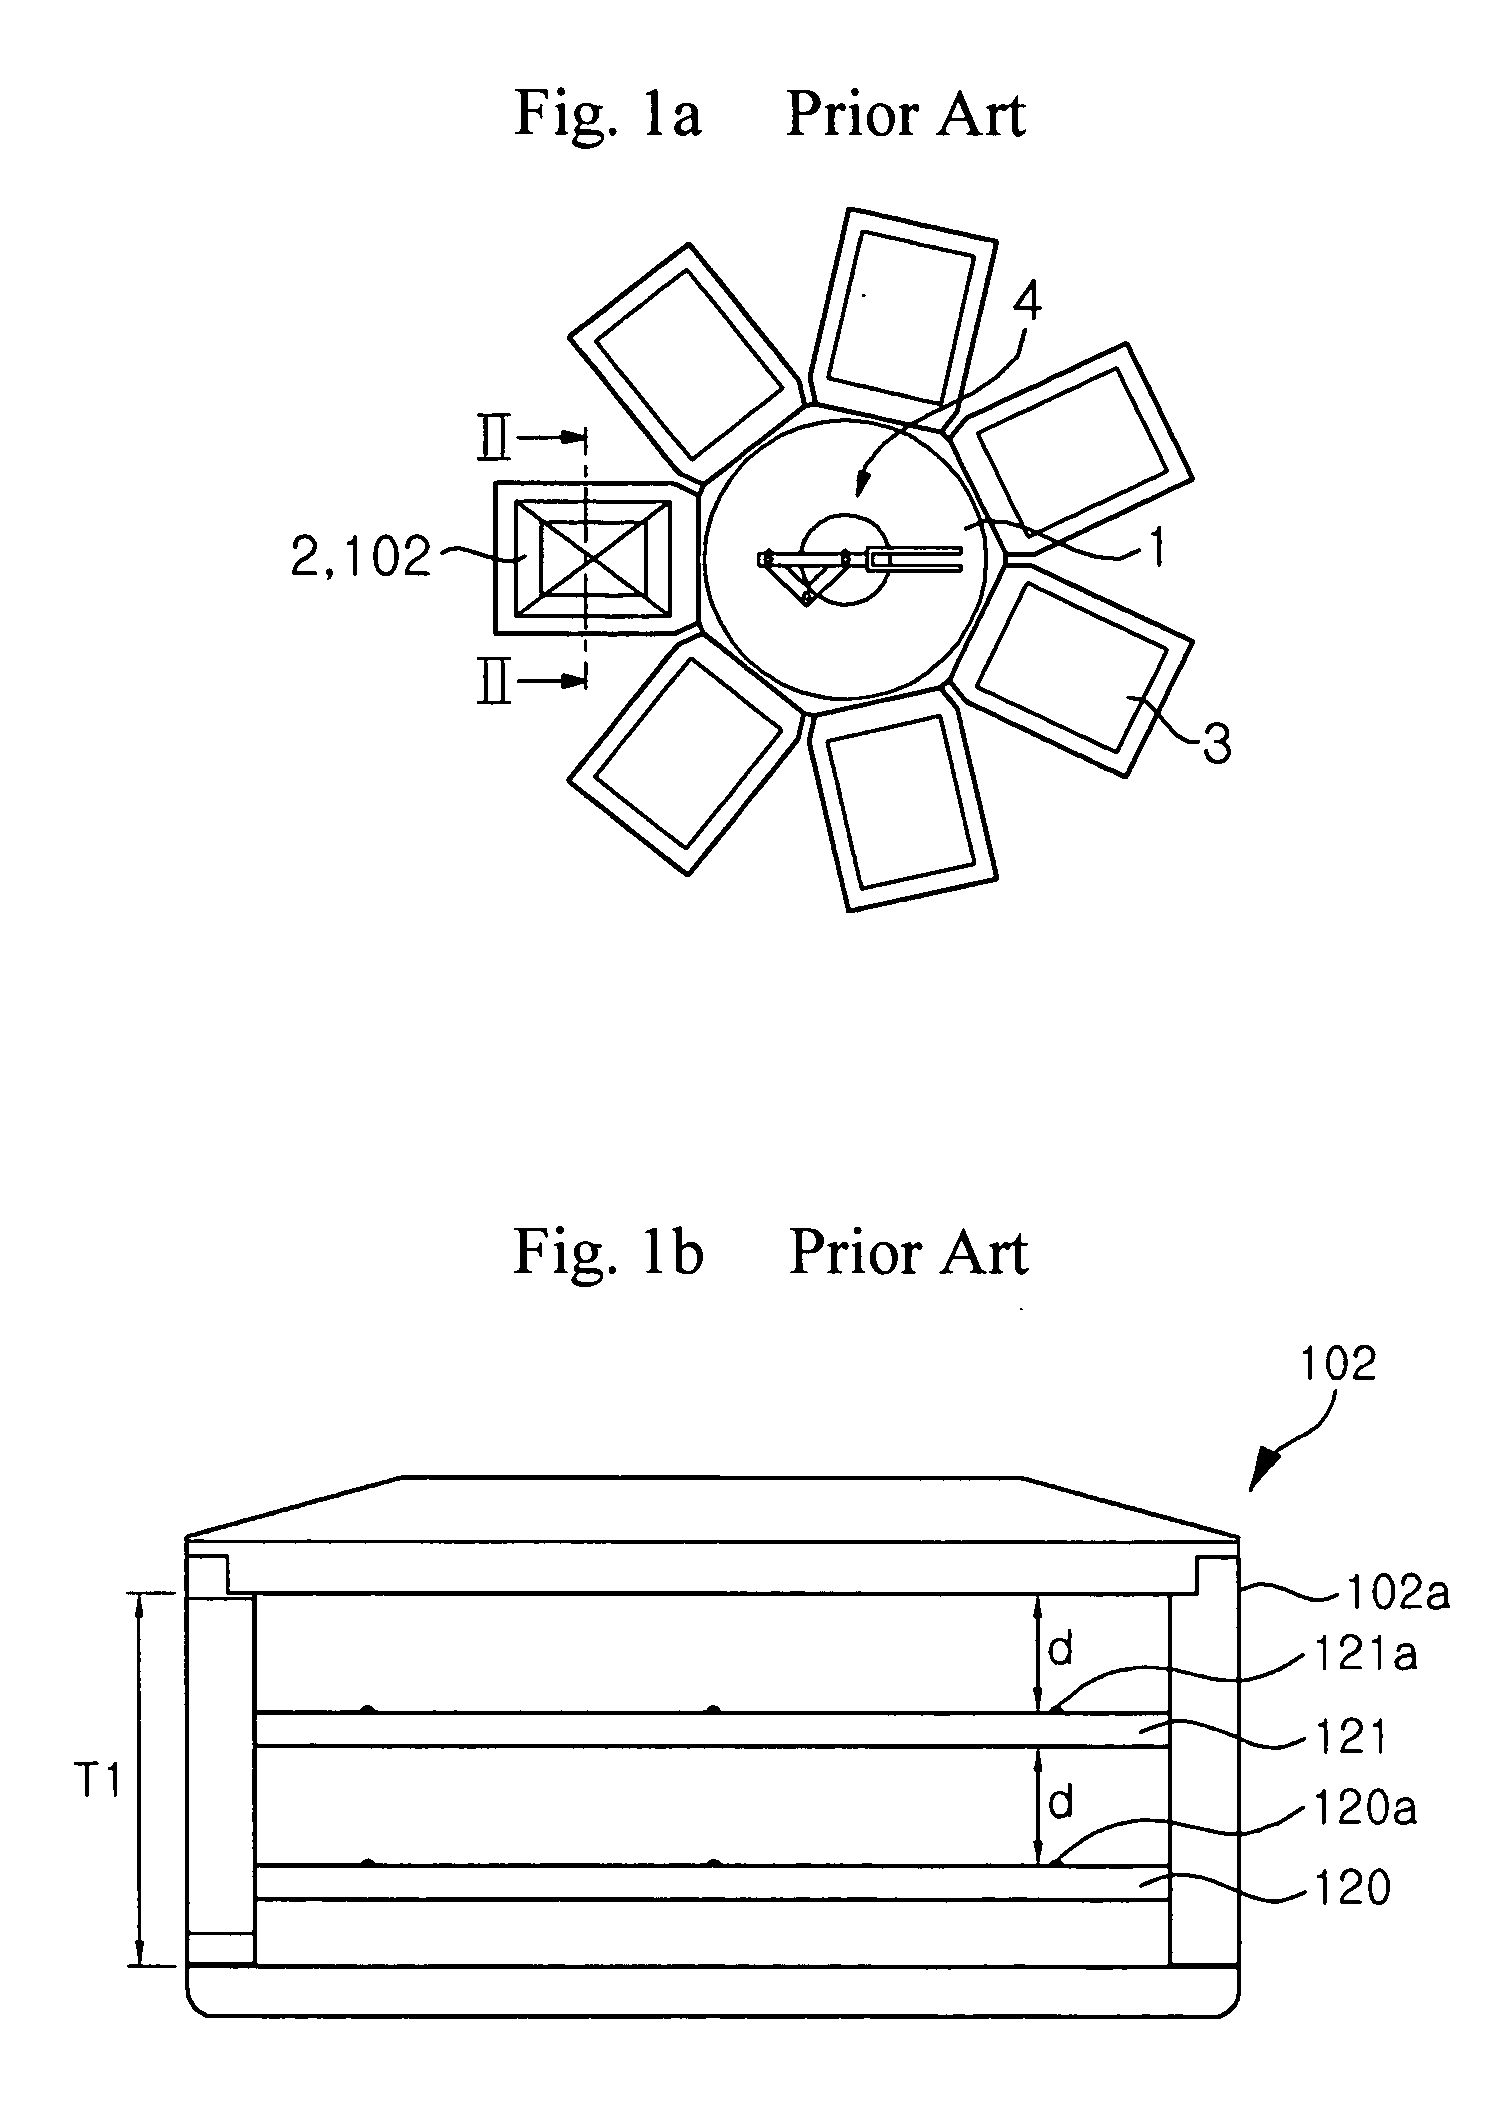 Load lock and load lock chamber using the same